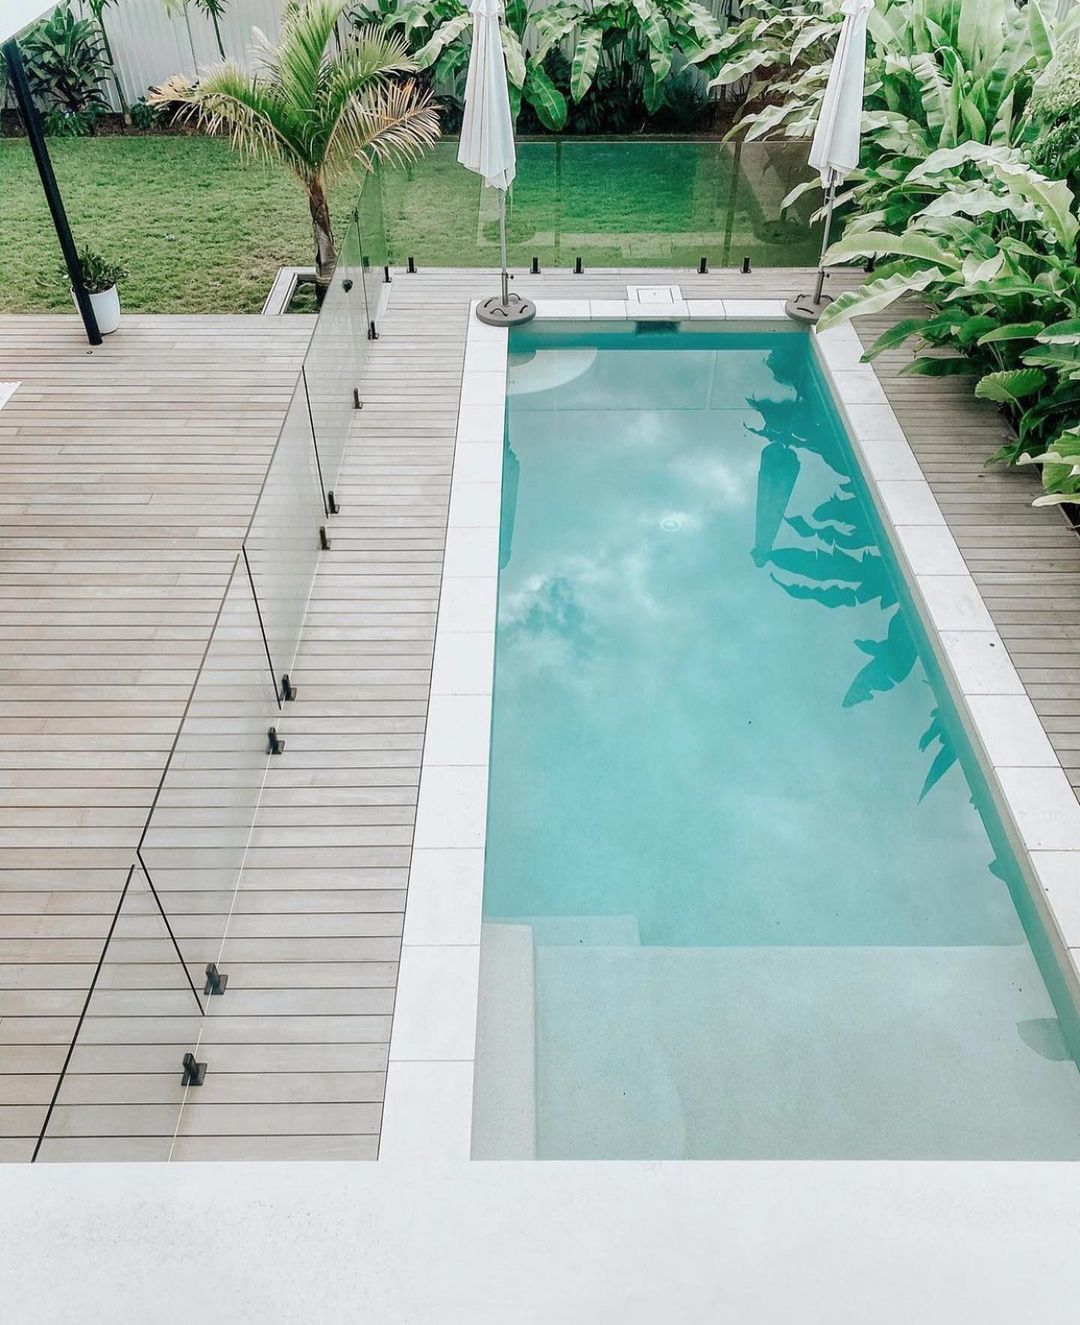 Uniquely Crafted Pool Layouts for Every Outdoor Space